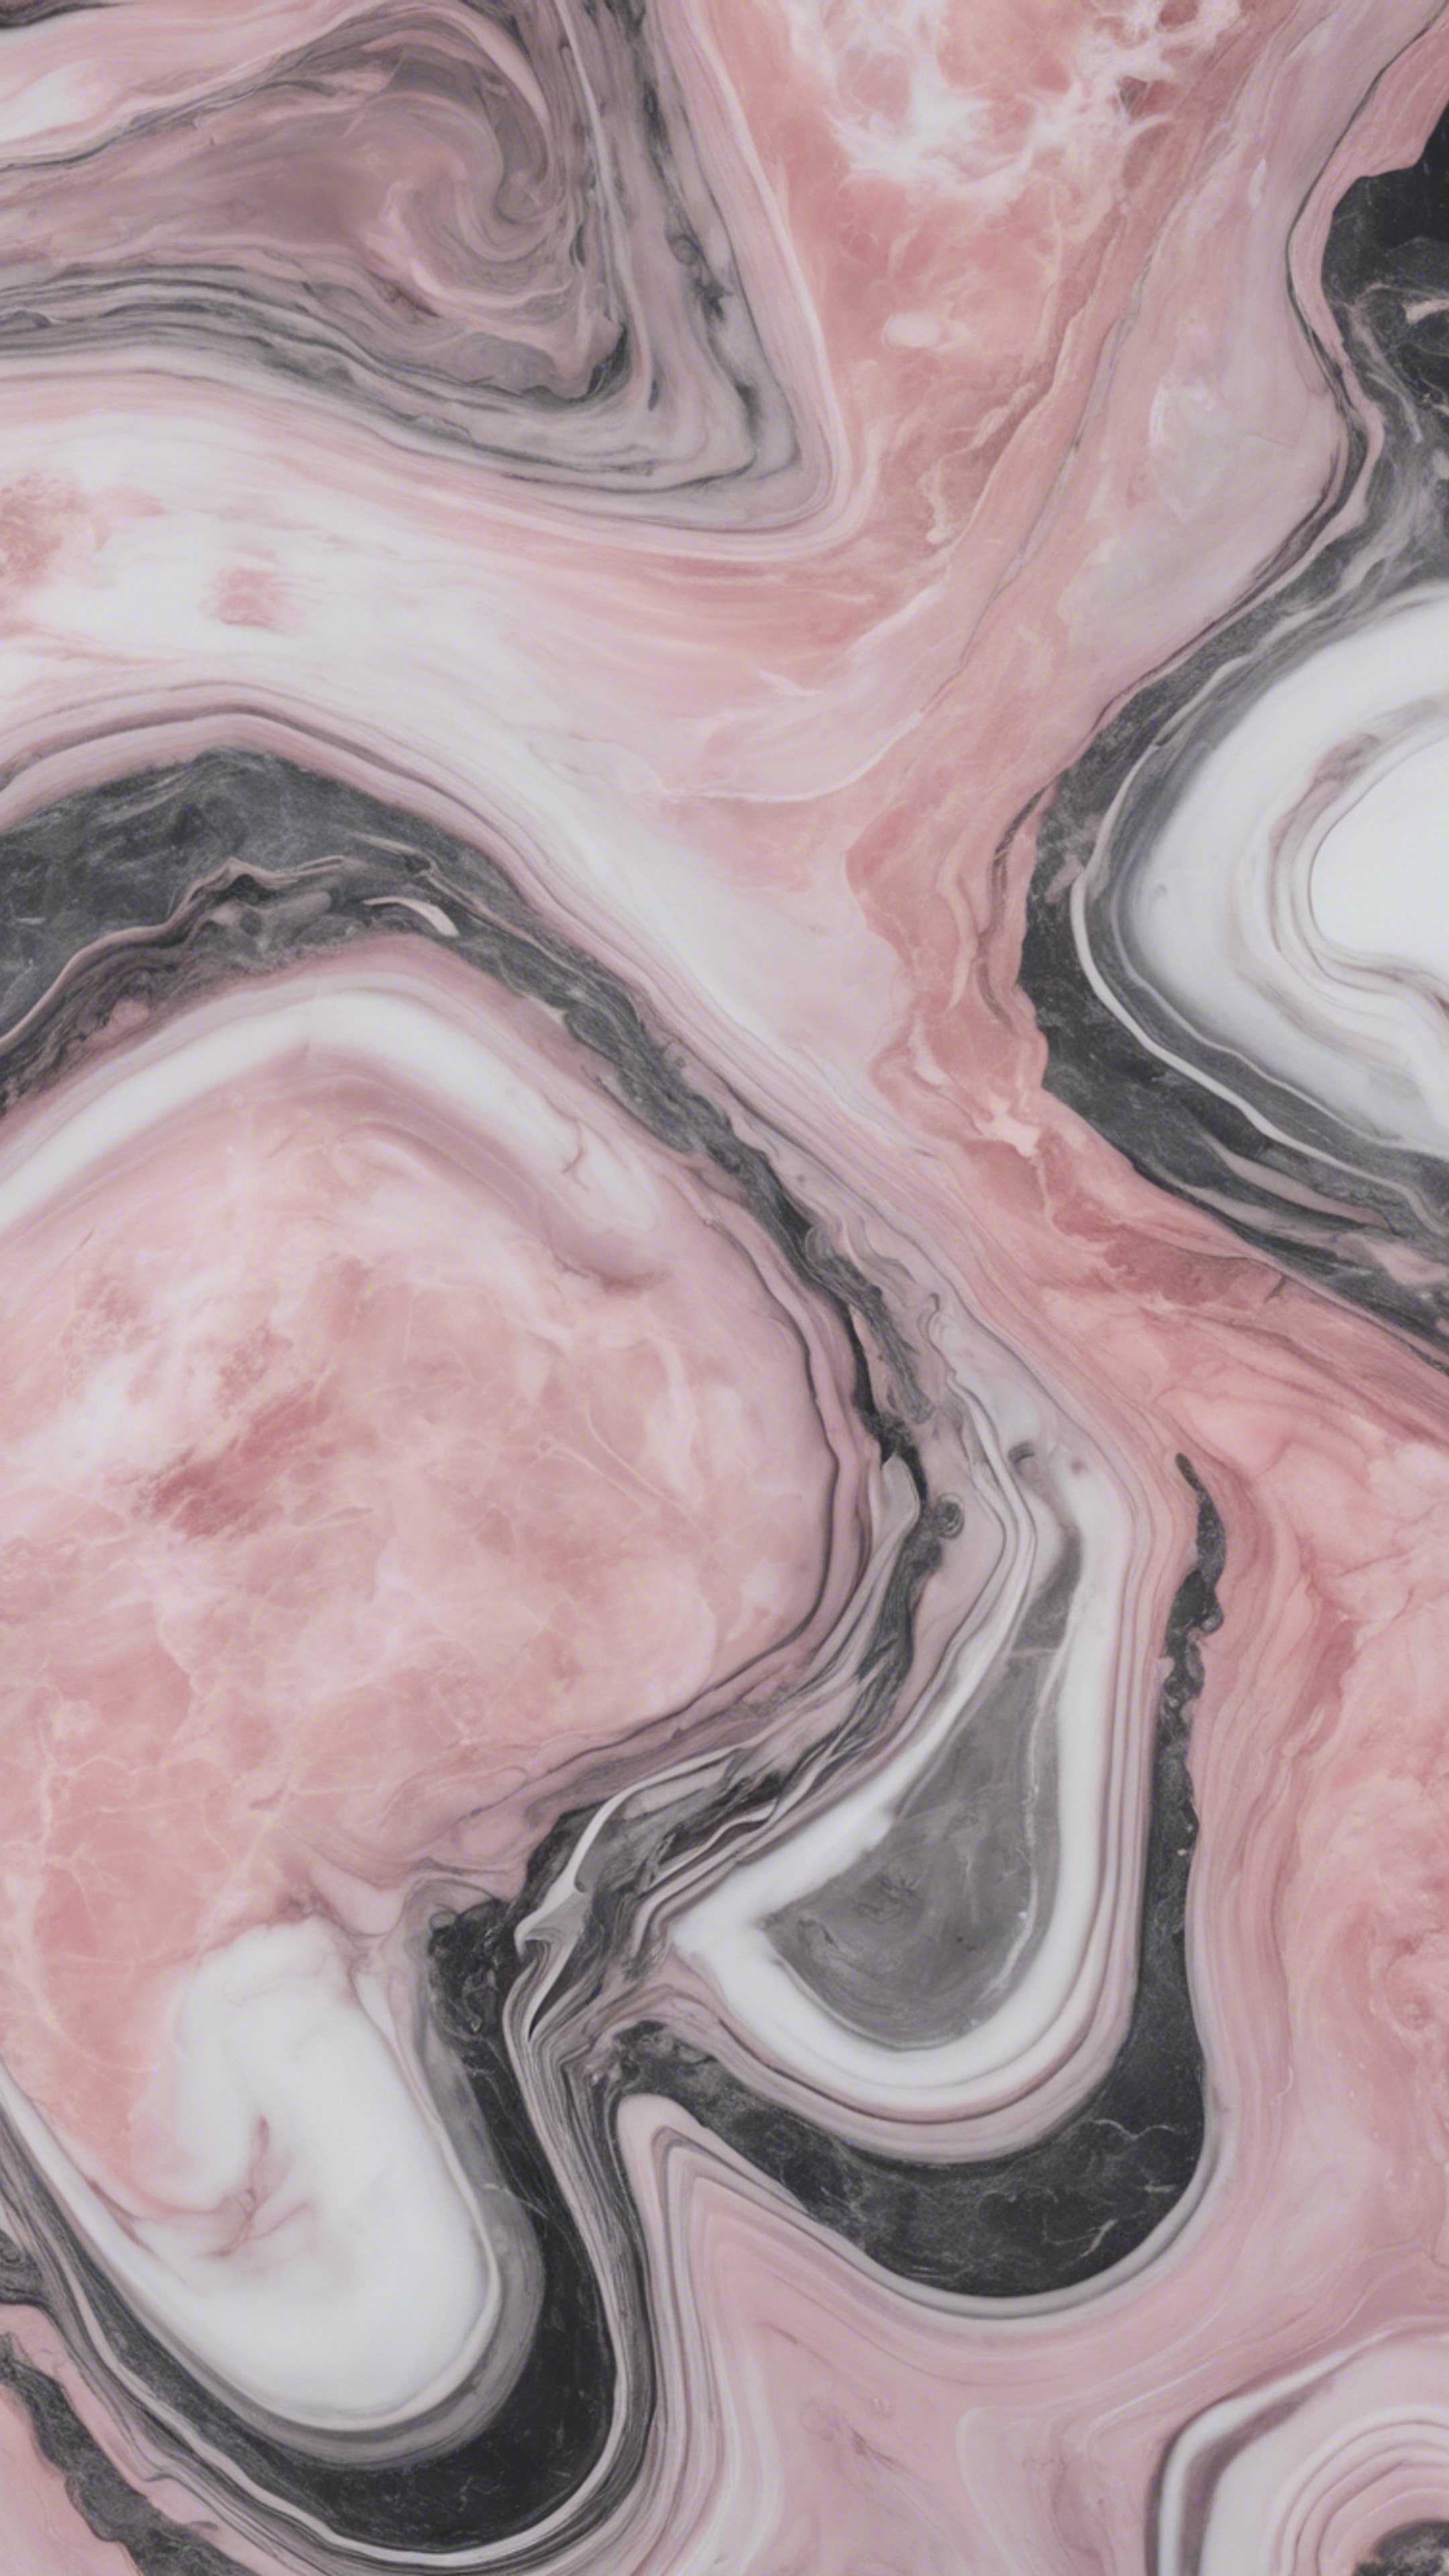 A swirling pattern of pink, white, and charcoal grey characteristic of polished pink marble.壁紙[fb90daec103040ffbaff]